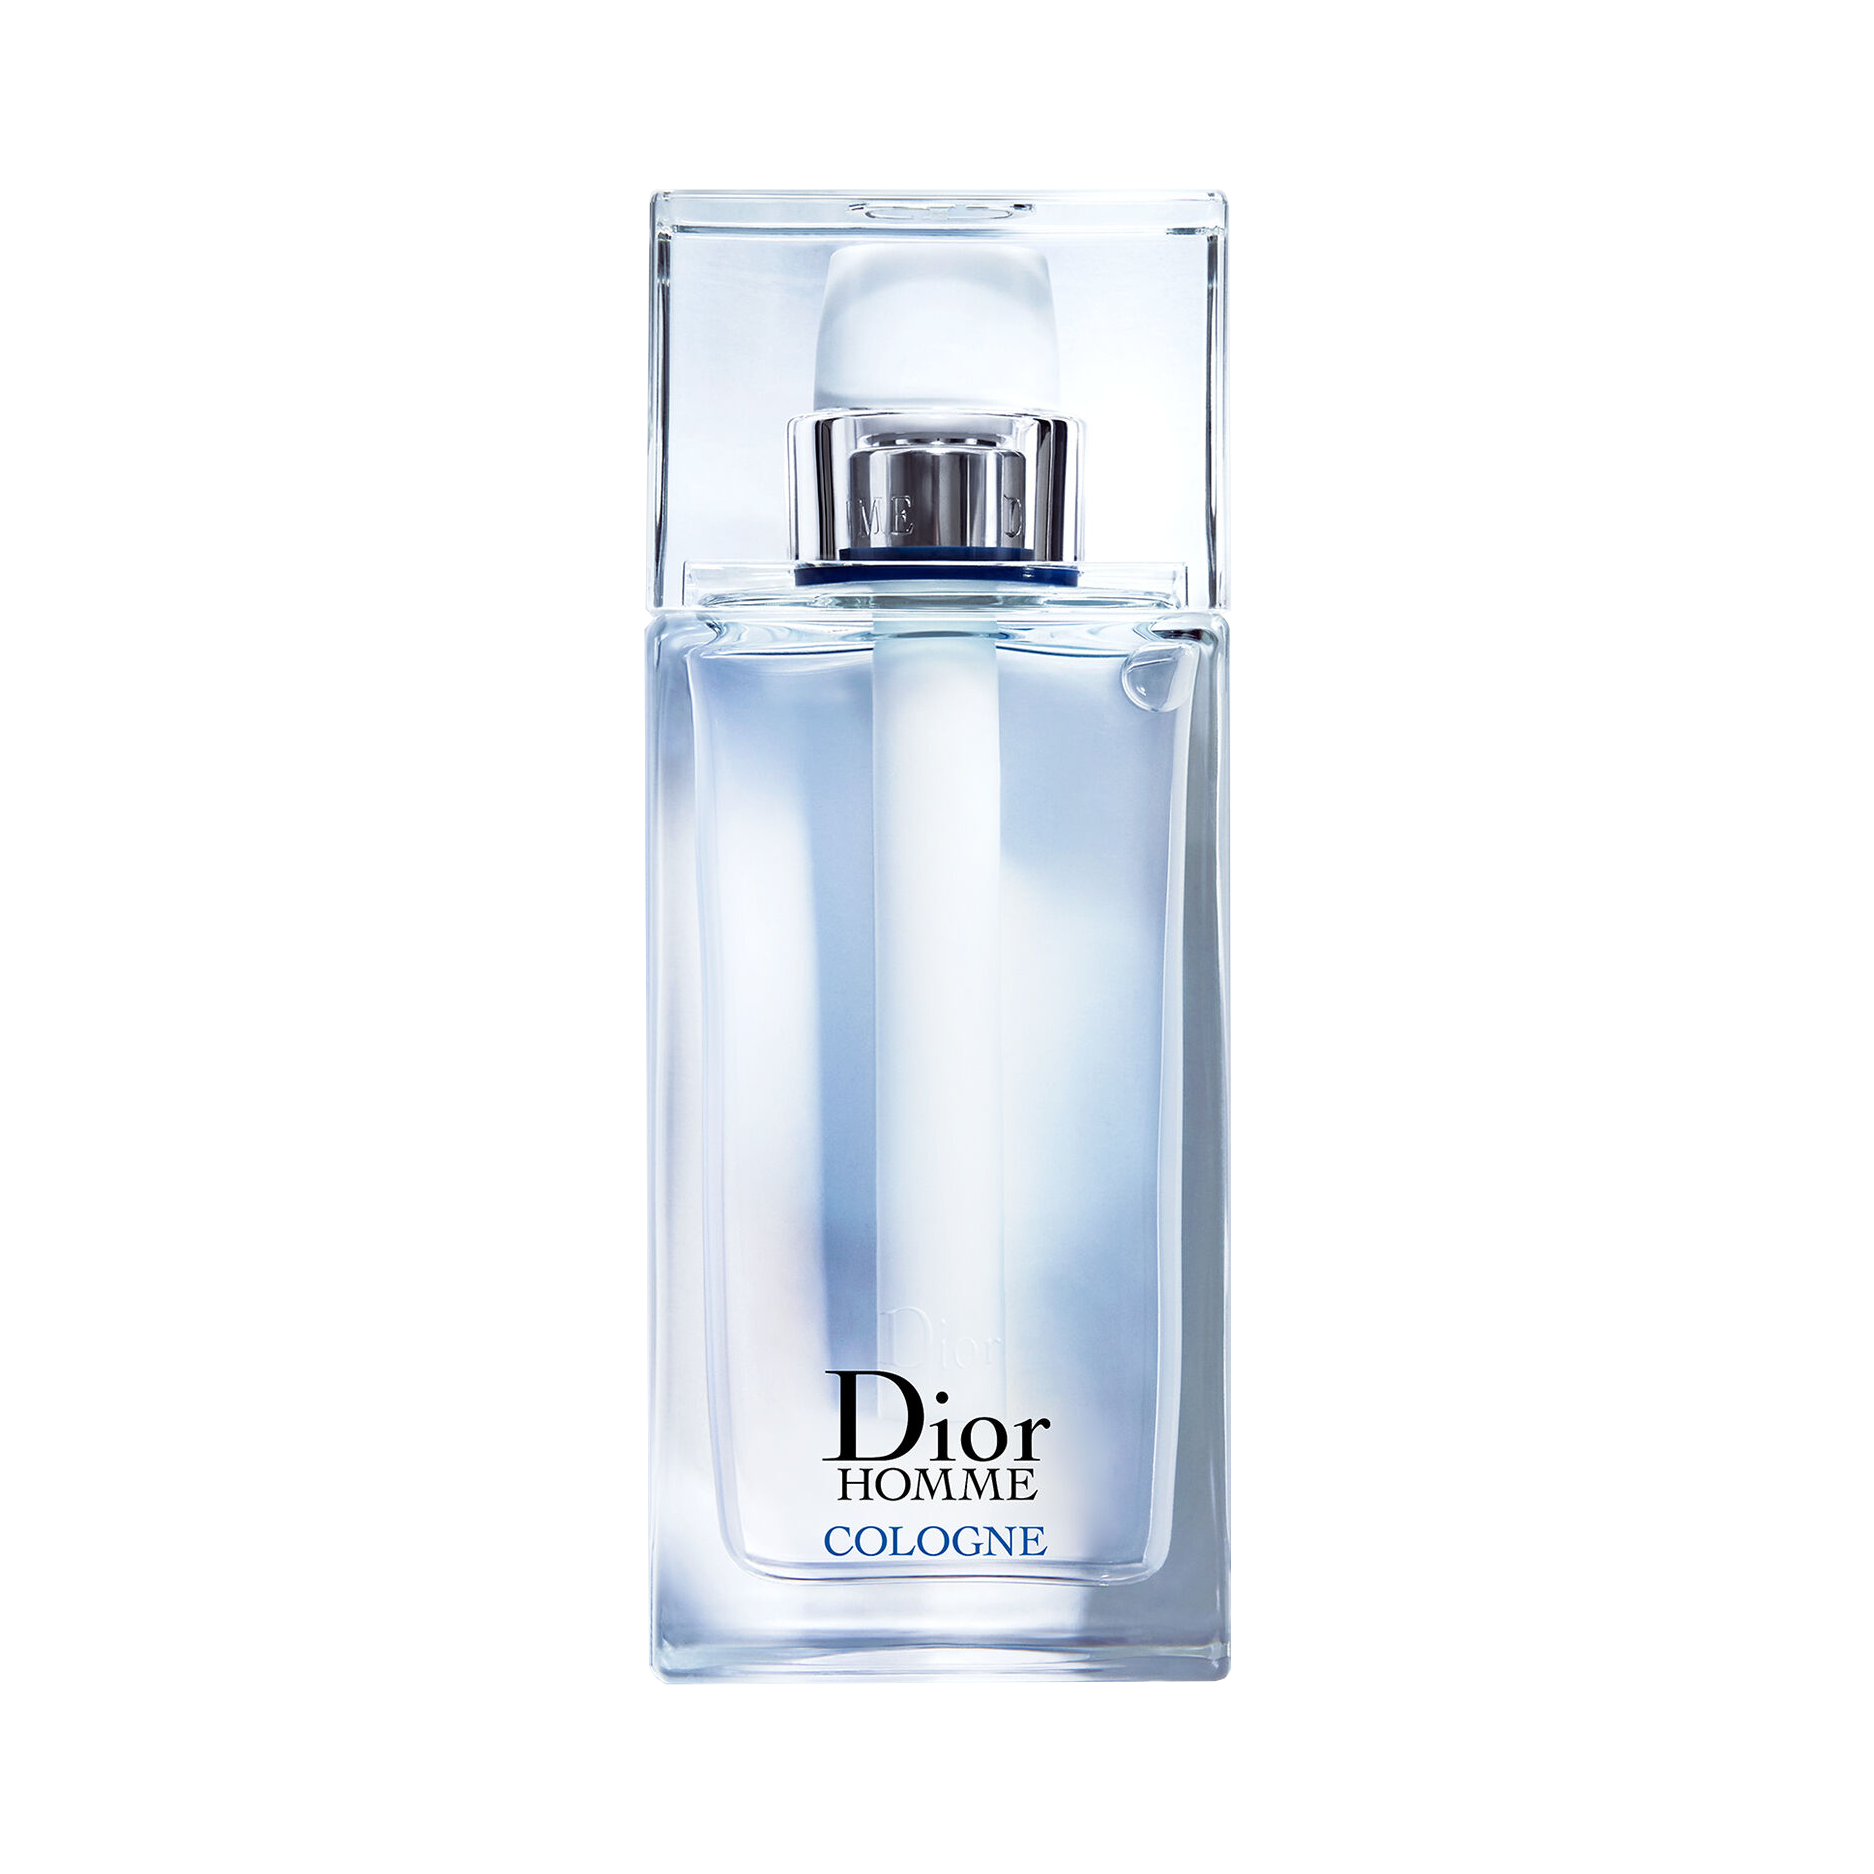 Eau Sauvage Parfum By Dior  ThePerfumeShoppk  One Stop For All Kind Of  Perfumes